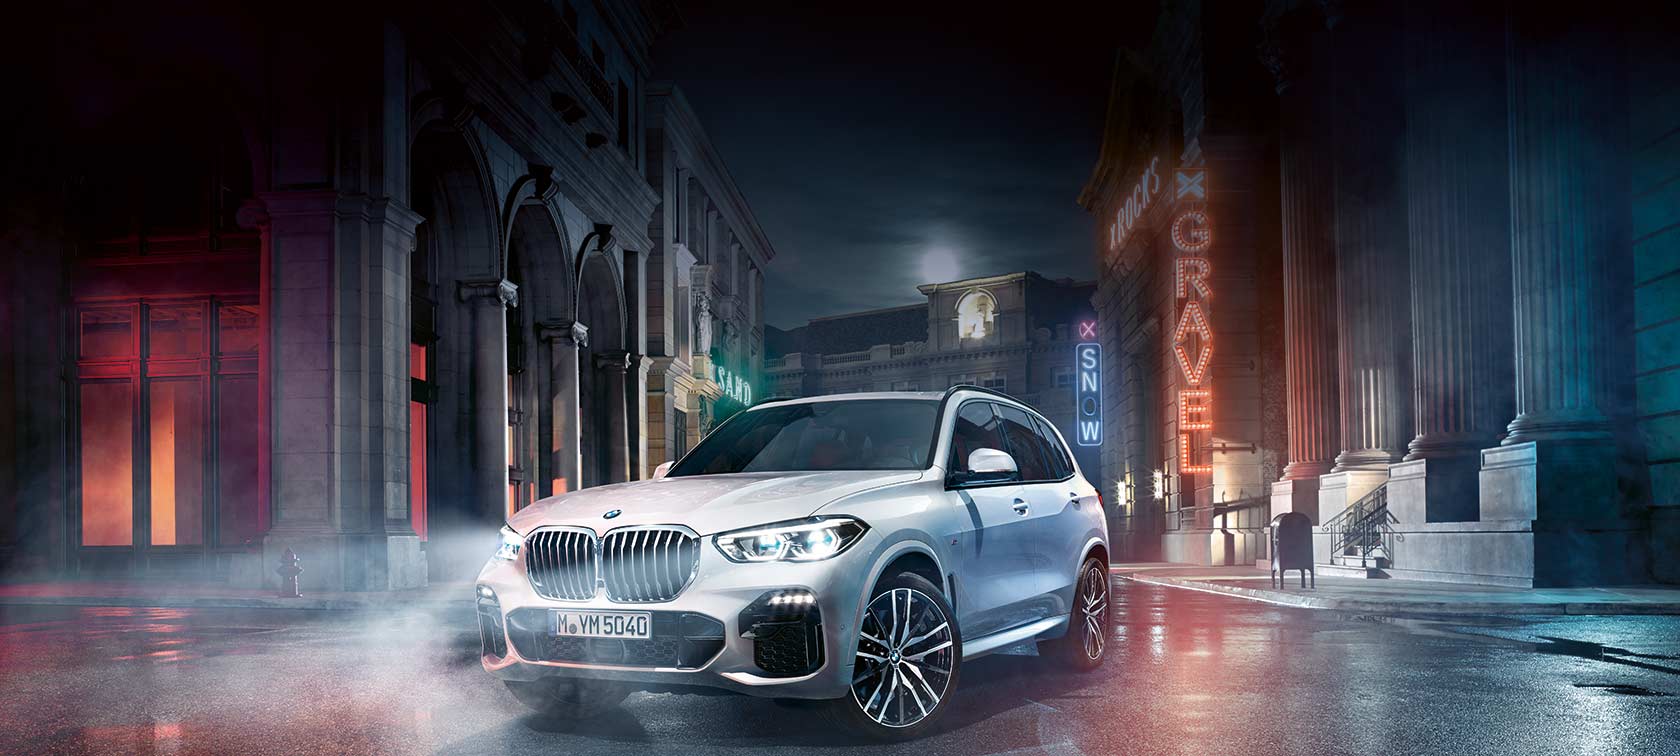 THE X5 - 